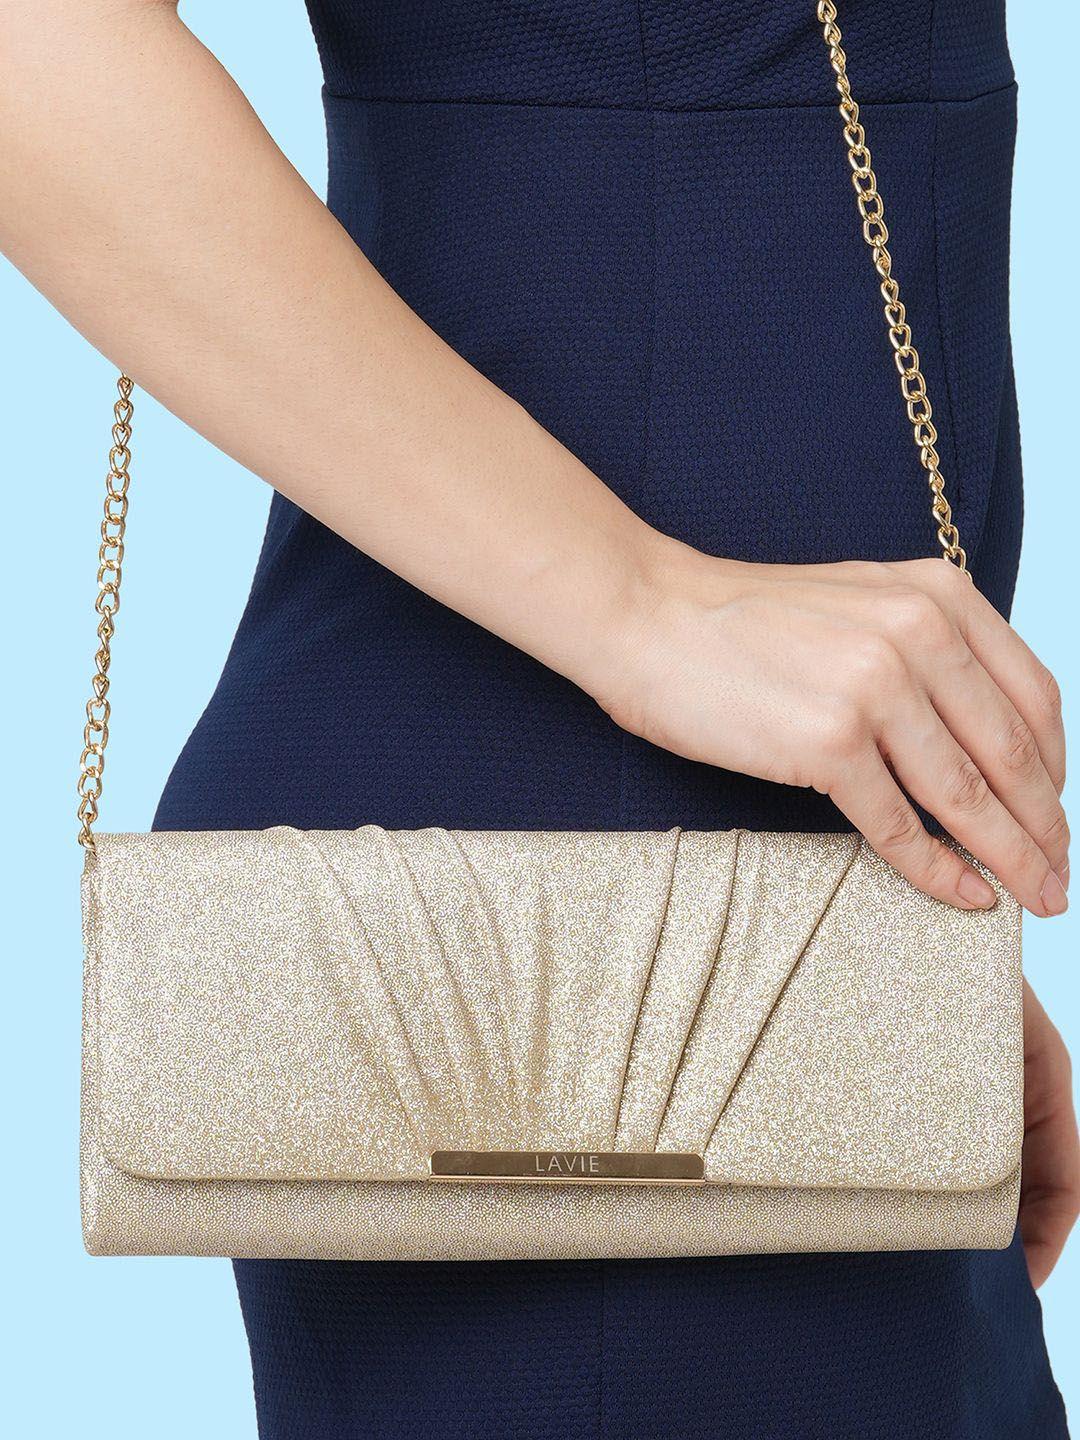 lavie ava gold-toned solid foldover clutch